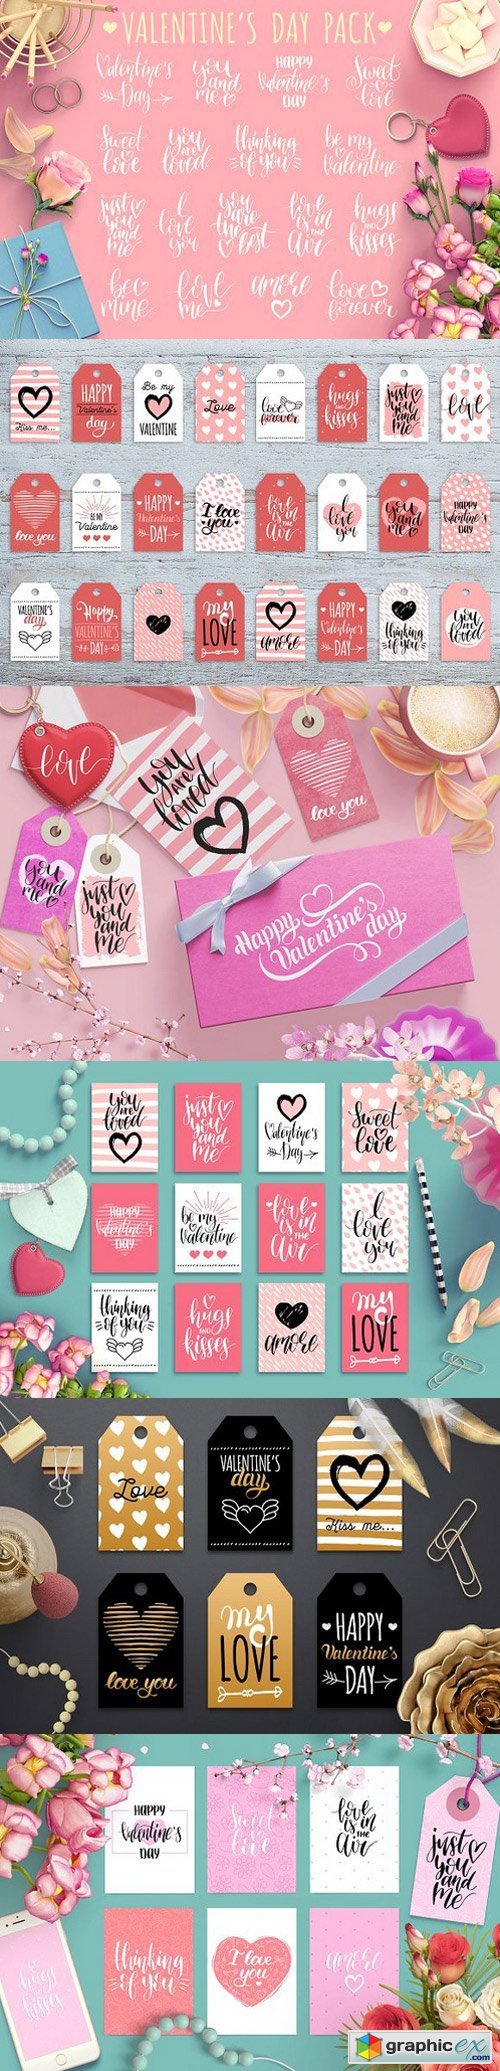 Valentine's day lettering and cards